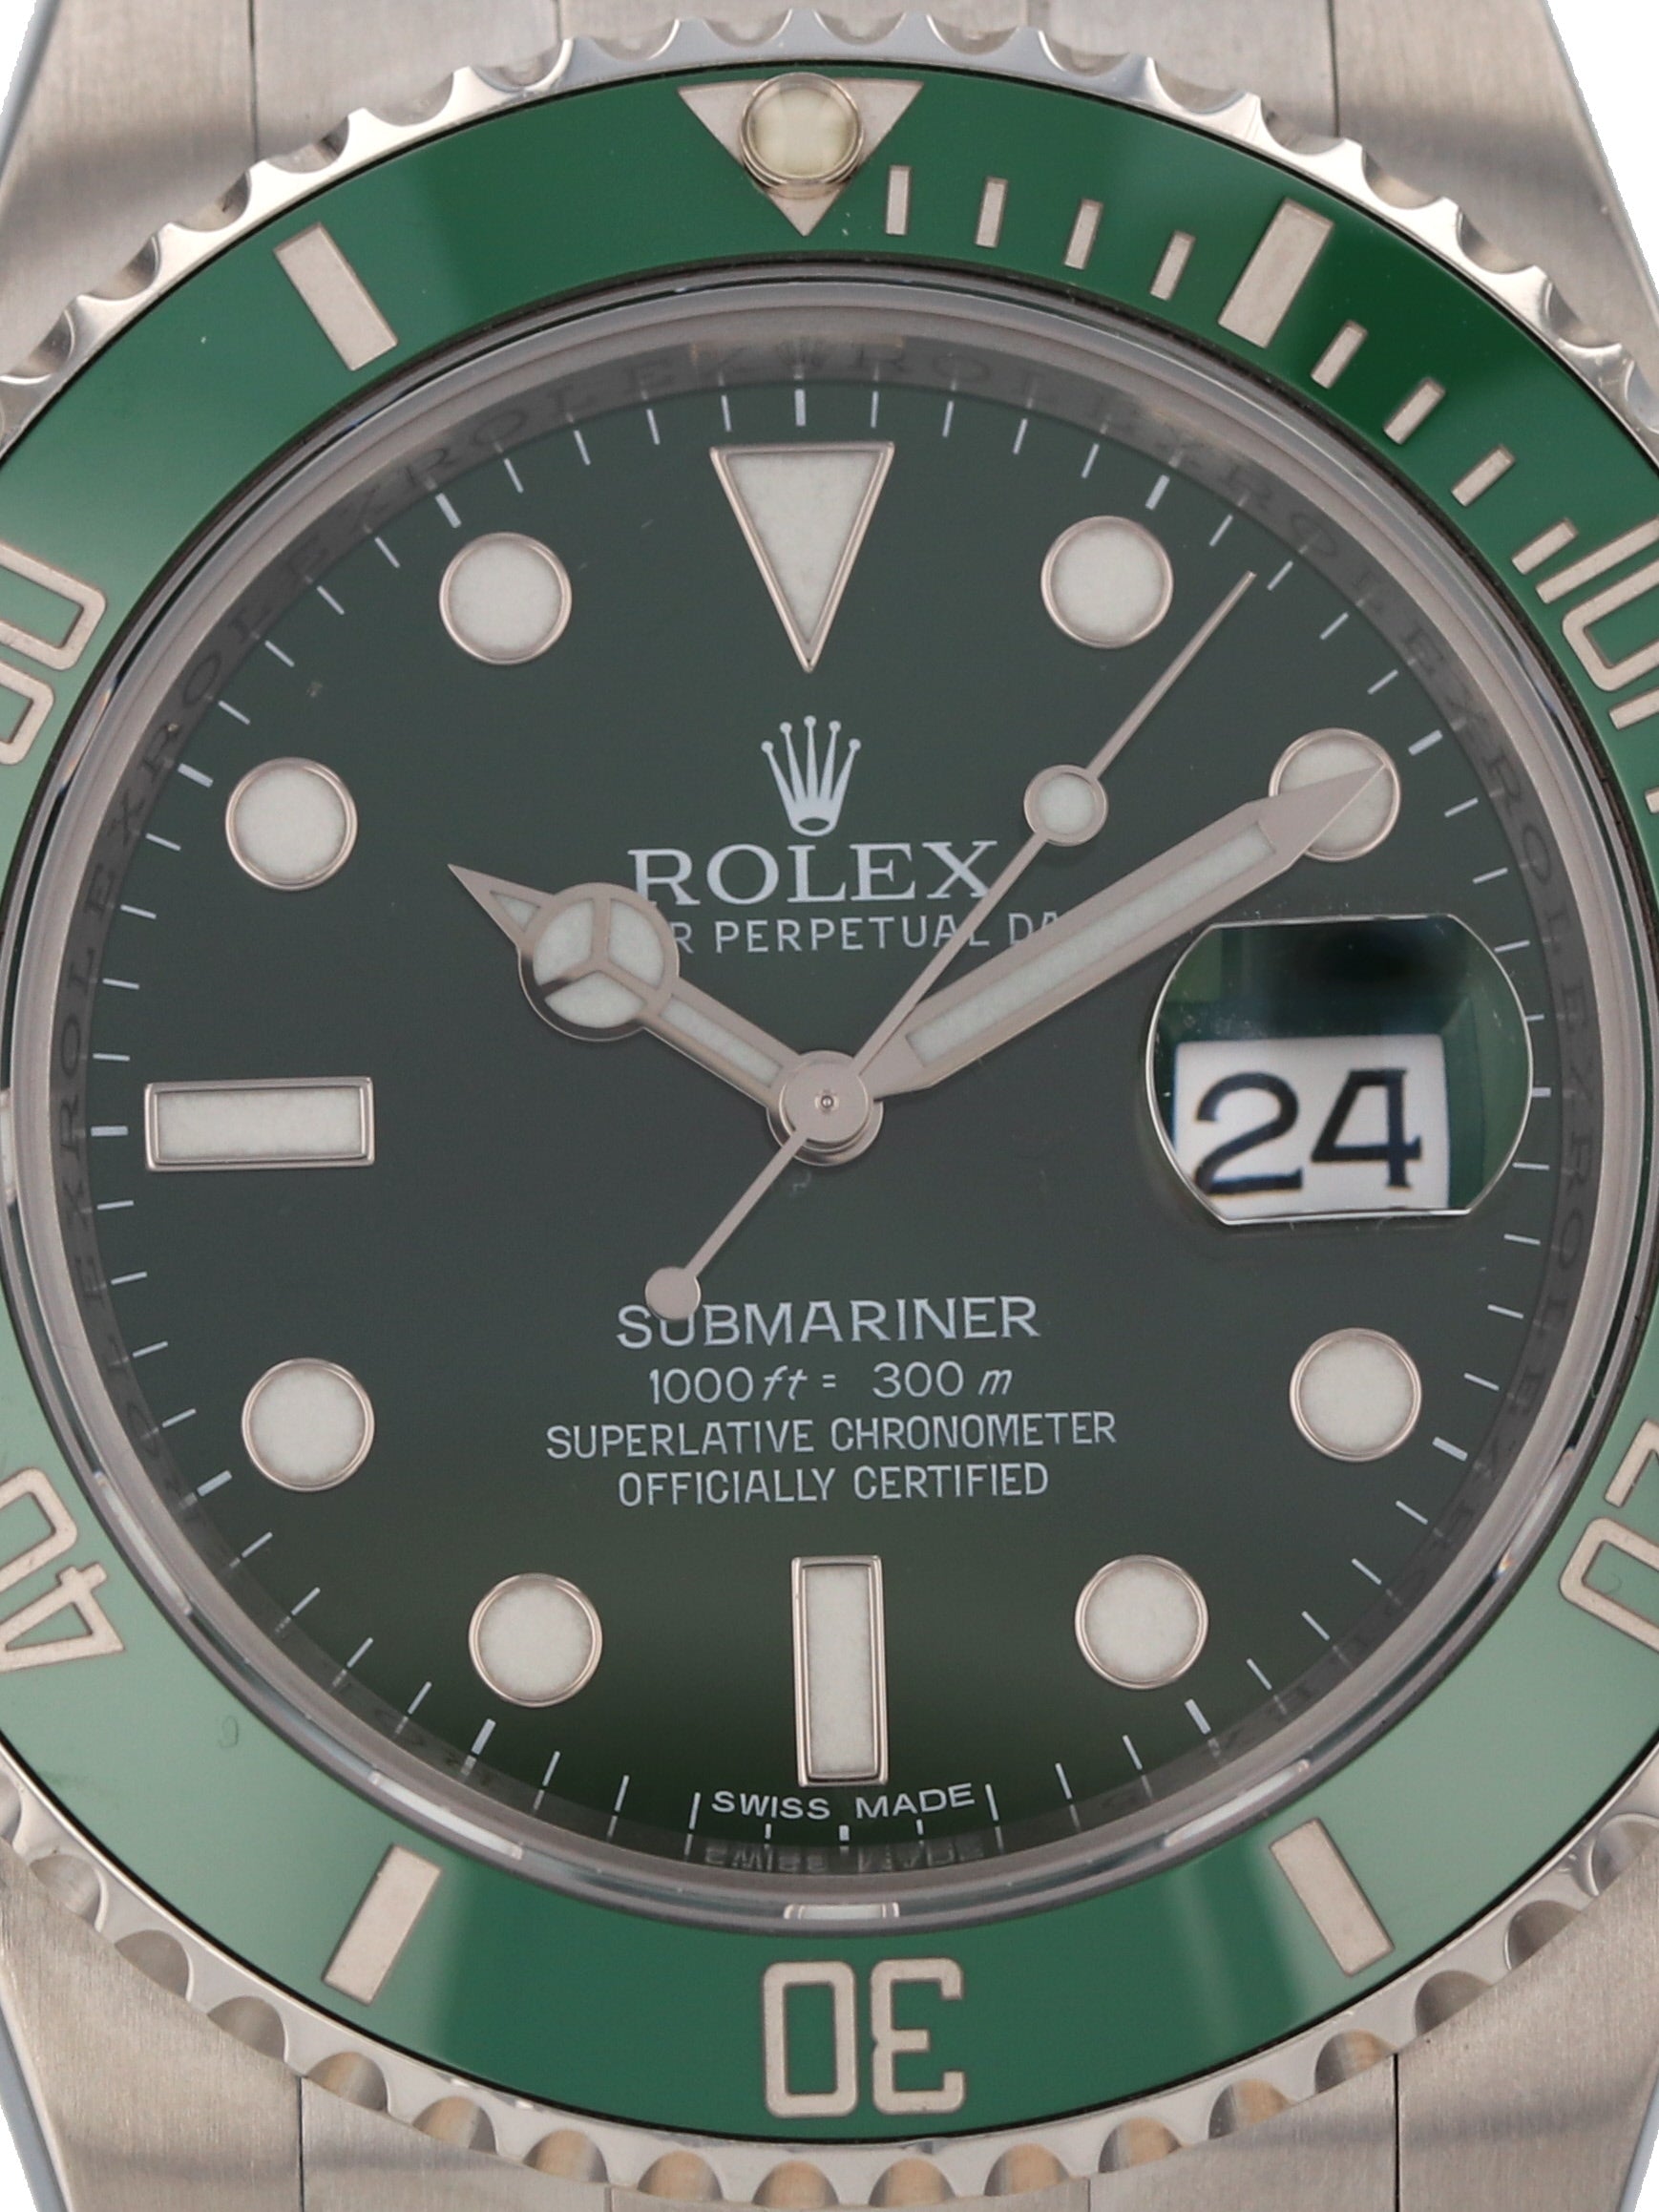 The Rolex Hulk Submariner 116610LV: Upclose and Personal